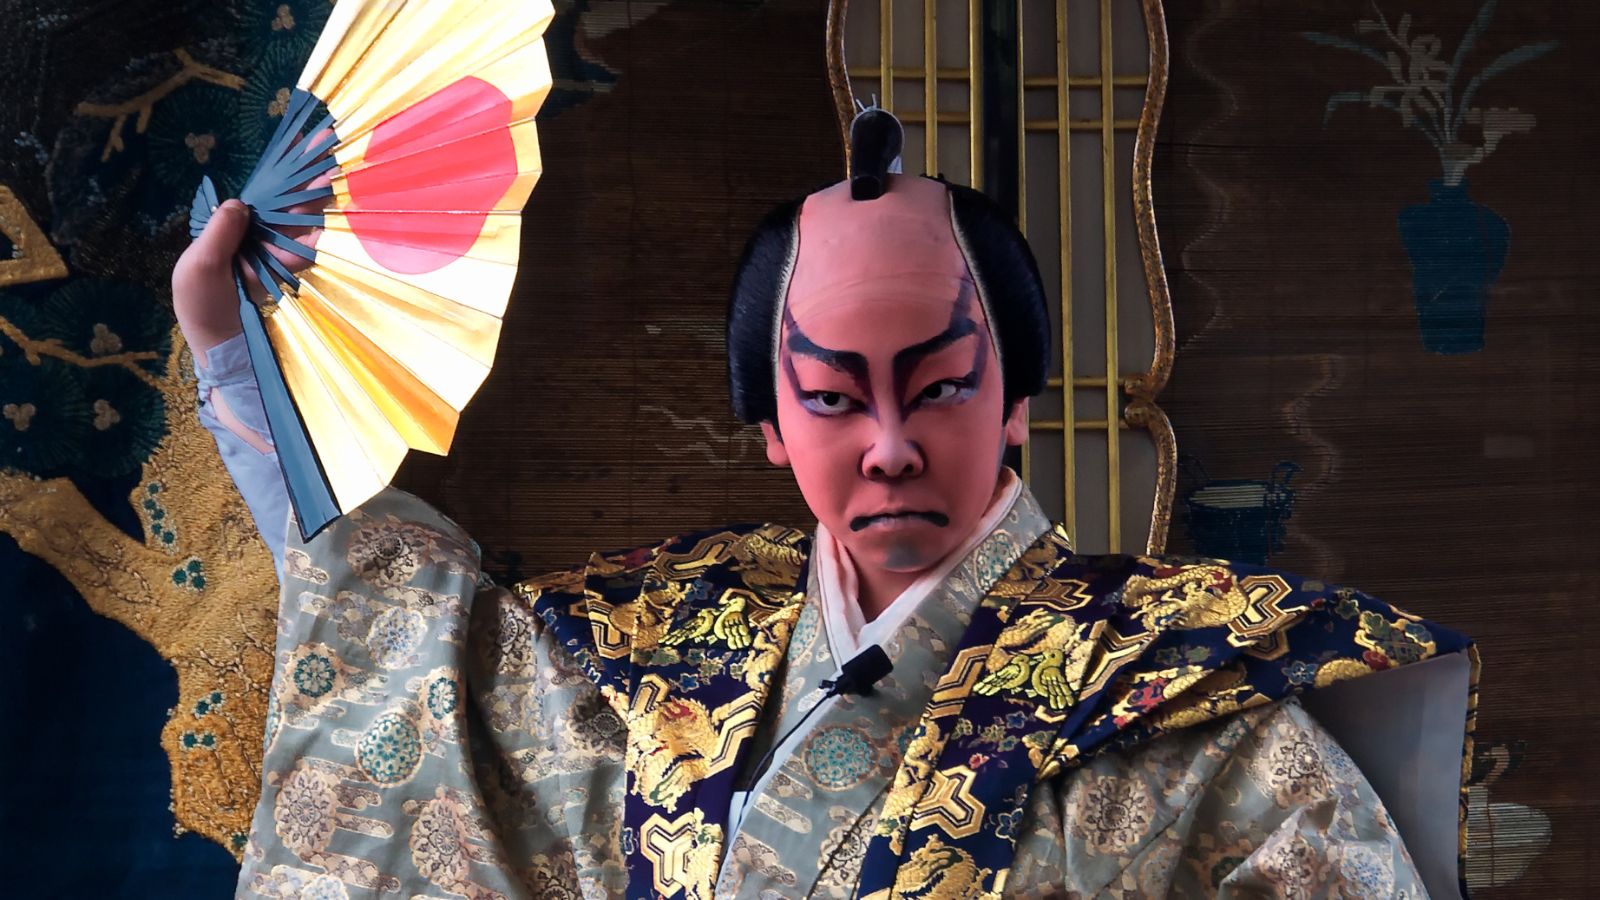 Color photo of a kabuki actor with dramatic red and black face makeup and traditional hairstyle, staring intently and wearing an ornate gold and blue costume and holding up an open yellow fan with a red dot in the middle.